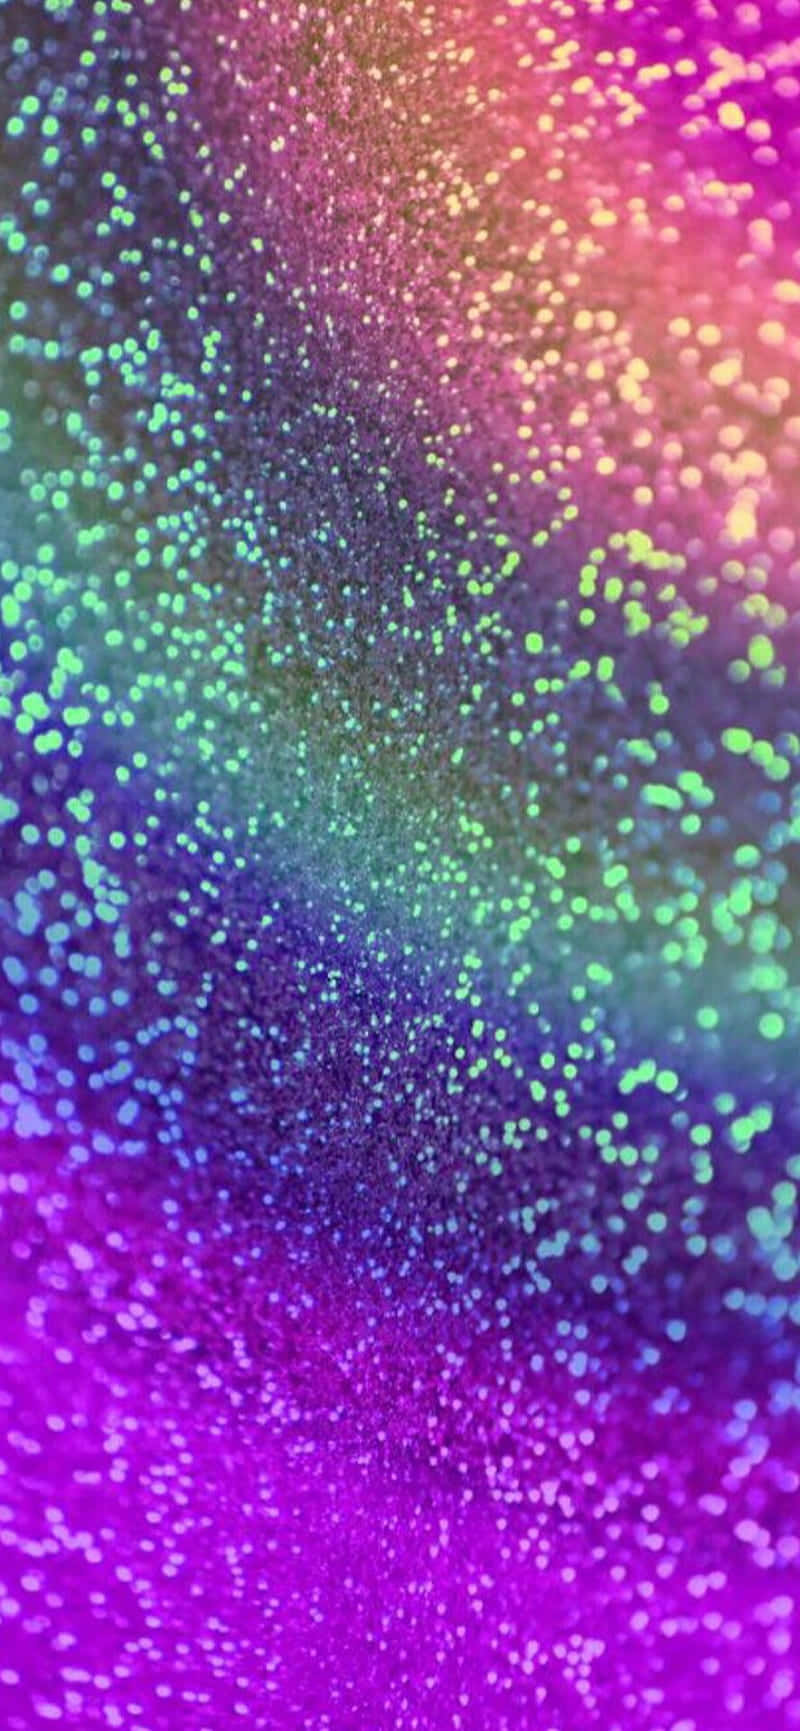 A glimpse of the perfectly irredescent rainbow glitter Wallpaper